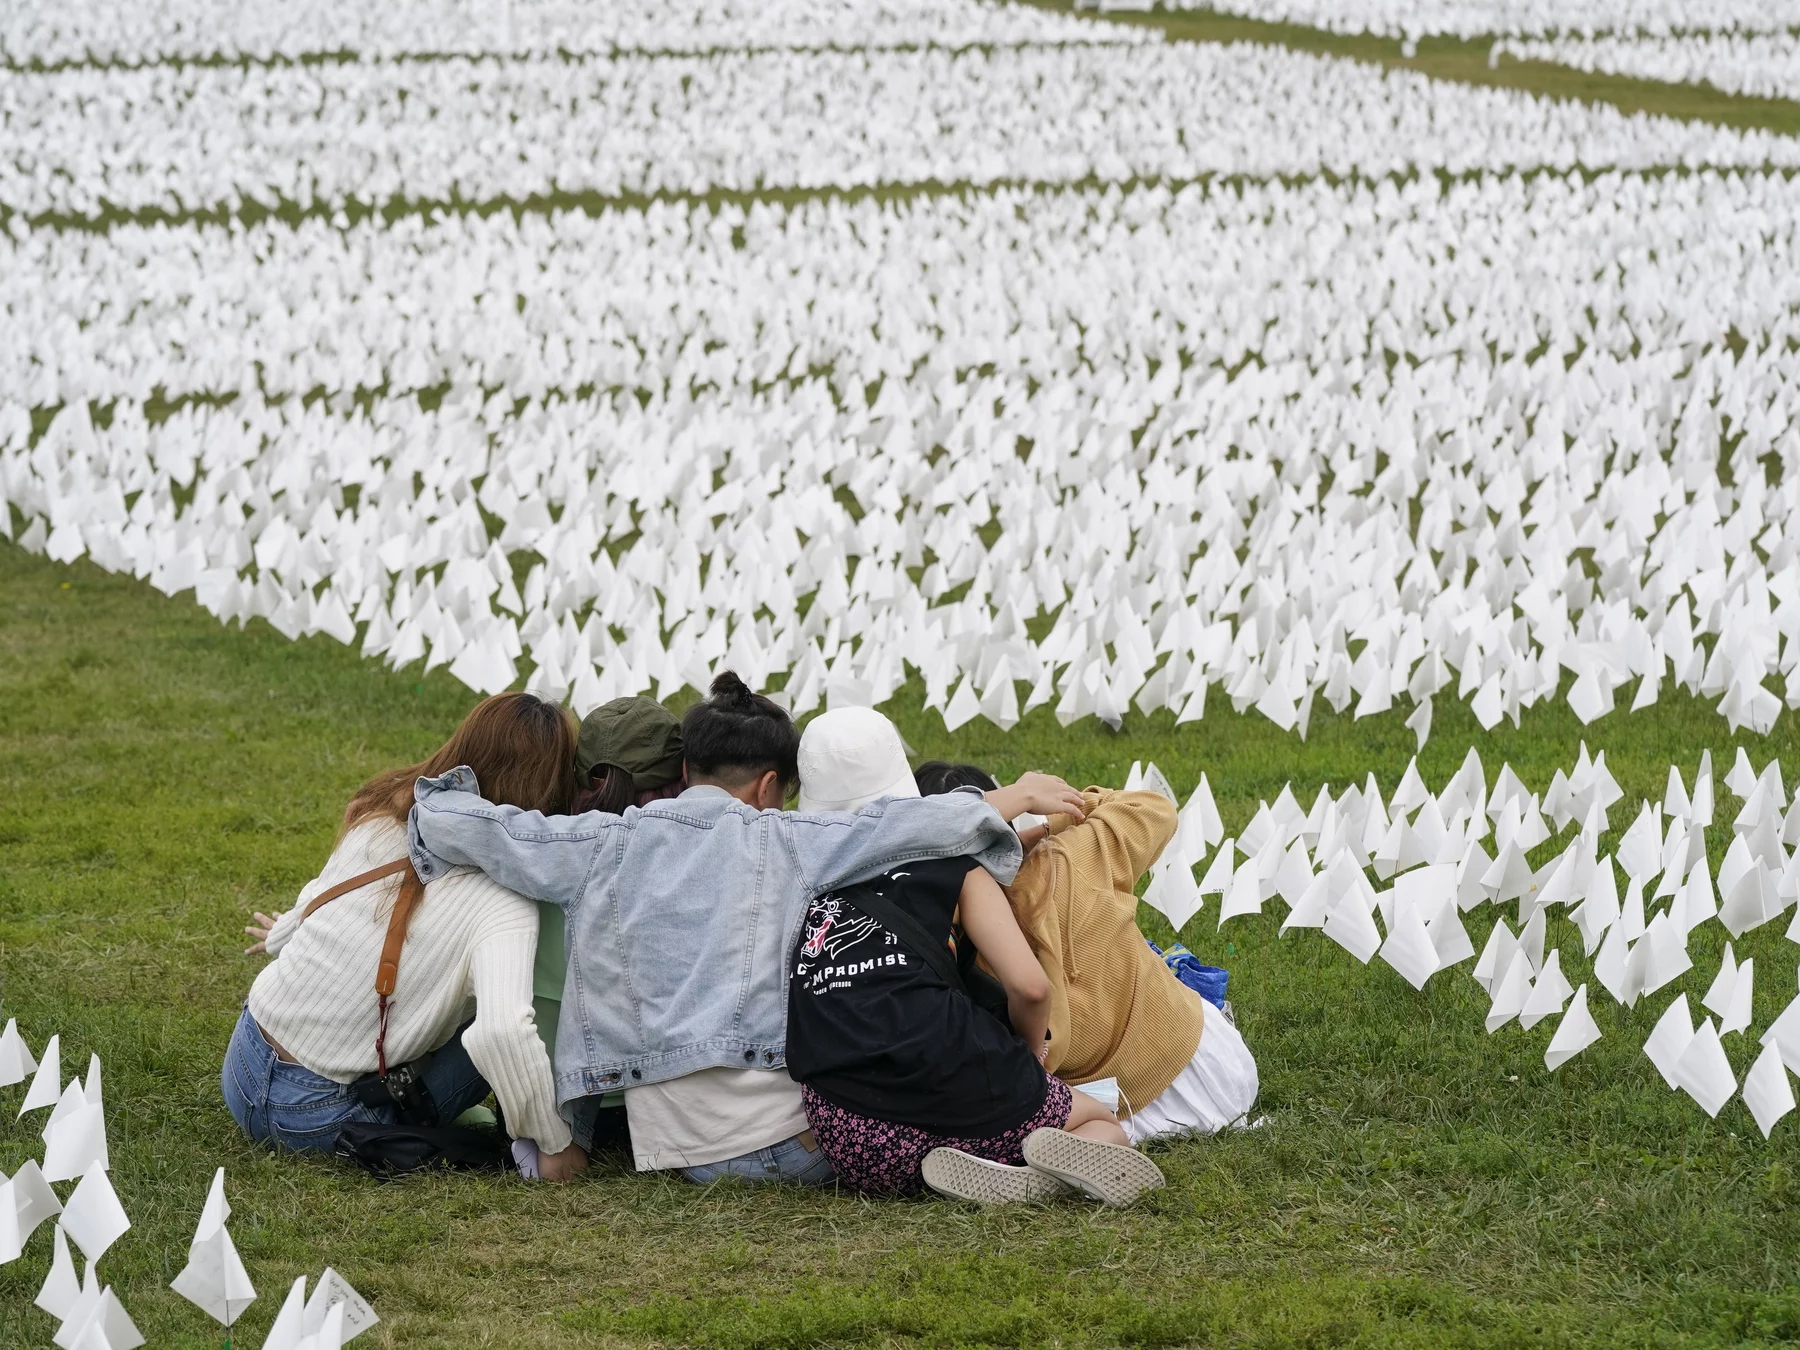 In September 2021, visitors sit amid white flags that were part of artist Suzanne Brennan Firstenberg’s “In America: Remember”, a temporary art installation that commemorated Americans who have died of COVID-19, on the National Mall in Washington, D.C. Photo: Patrick Semansky / AP